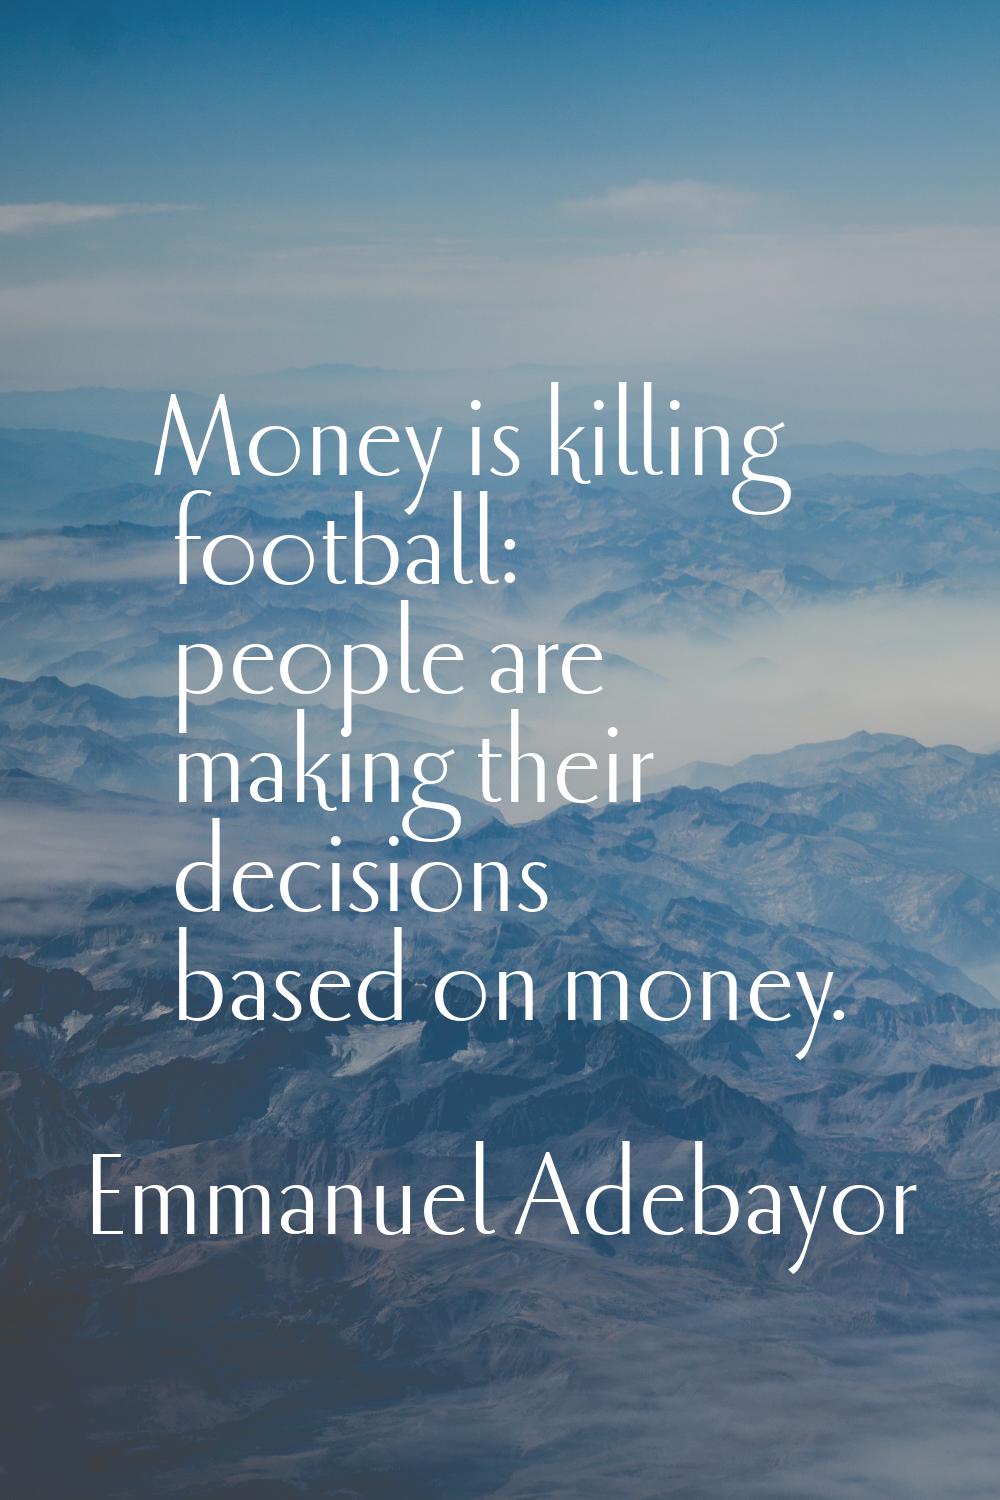 Money is killing football: people are making their decisions based on money.